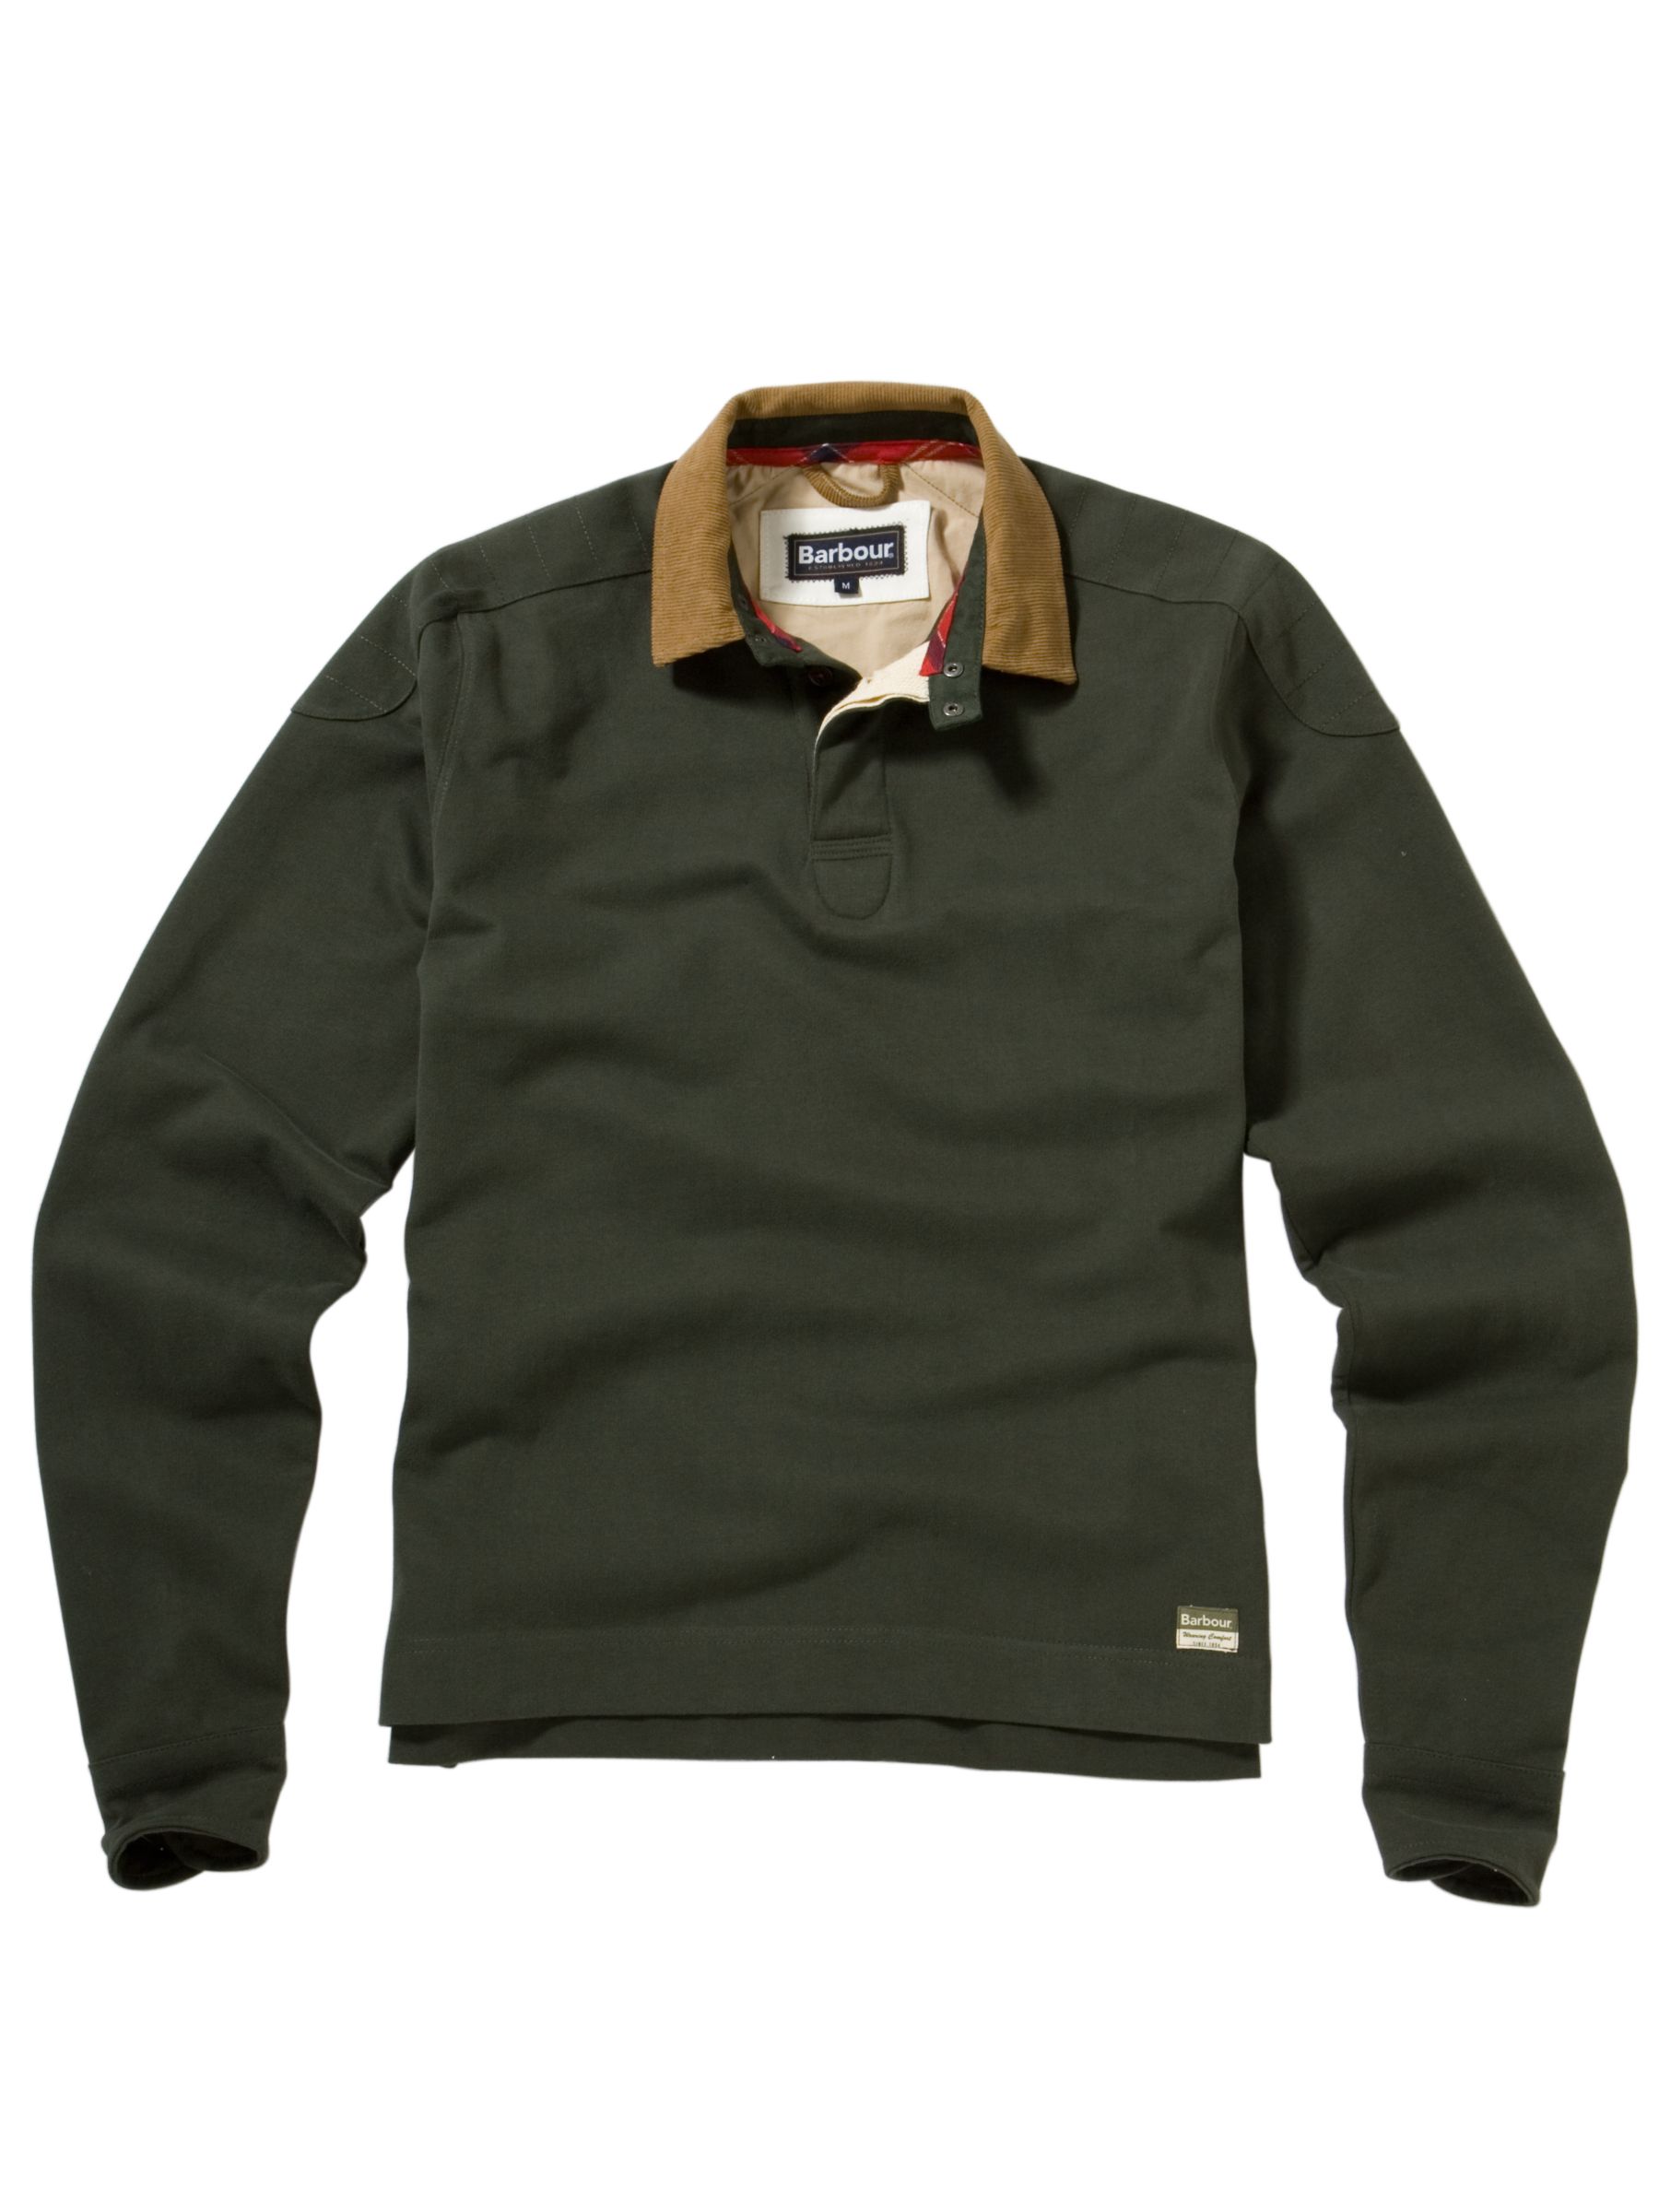 Barbour Eagle Long Sleeve Rugby Shirt, Green